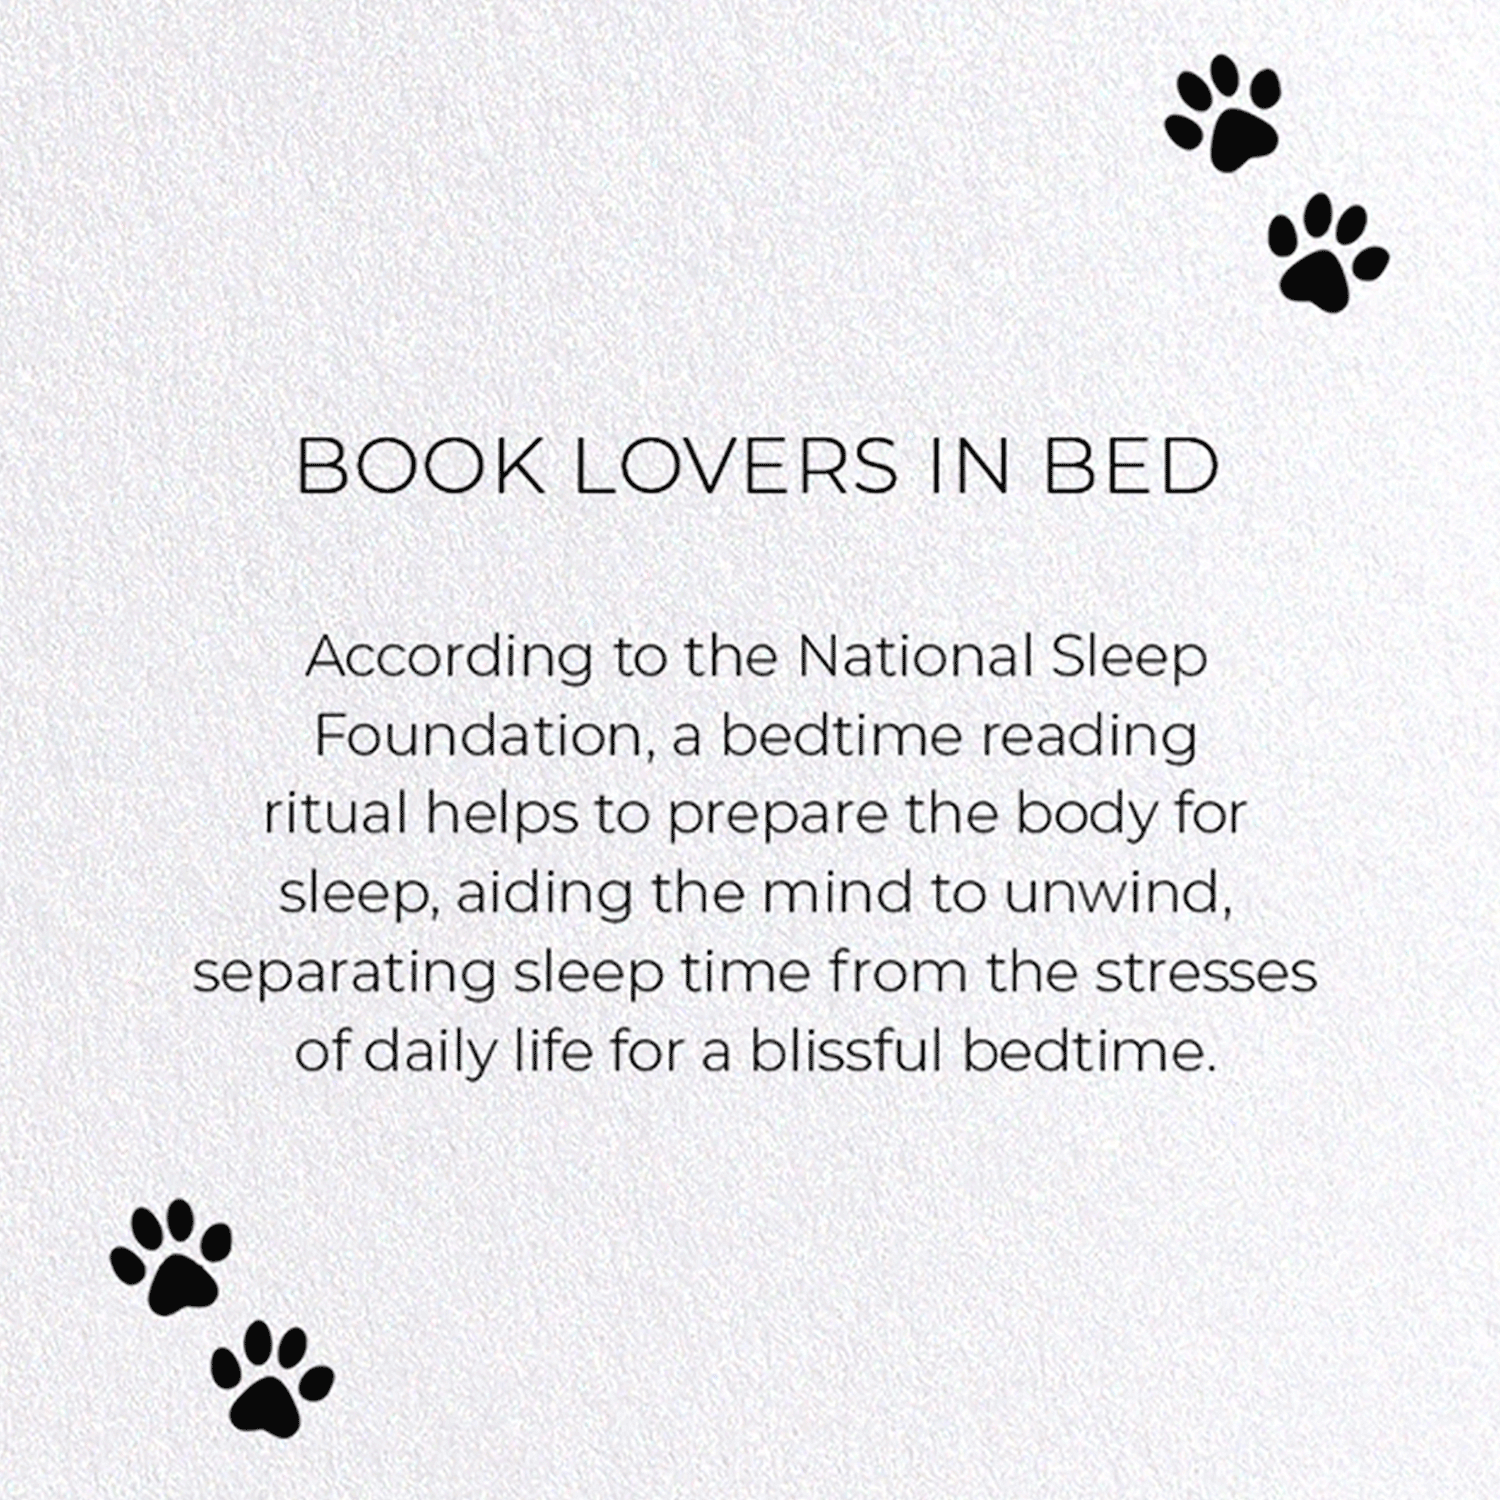 BOOK LOVERS IN BED